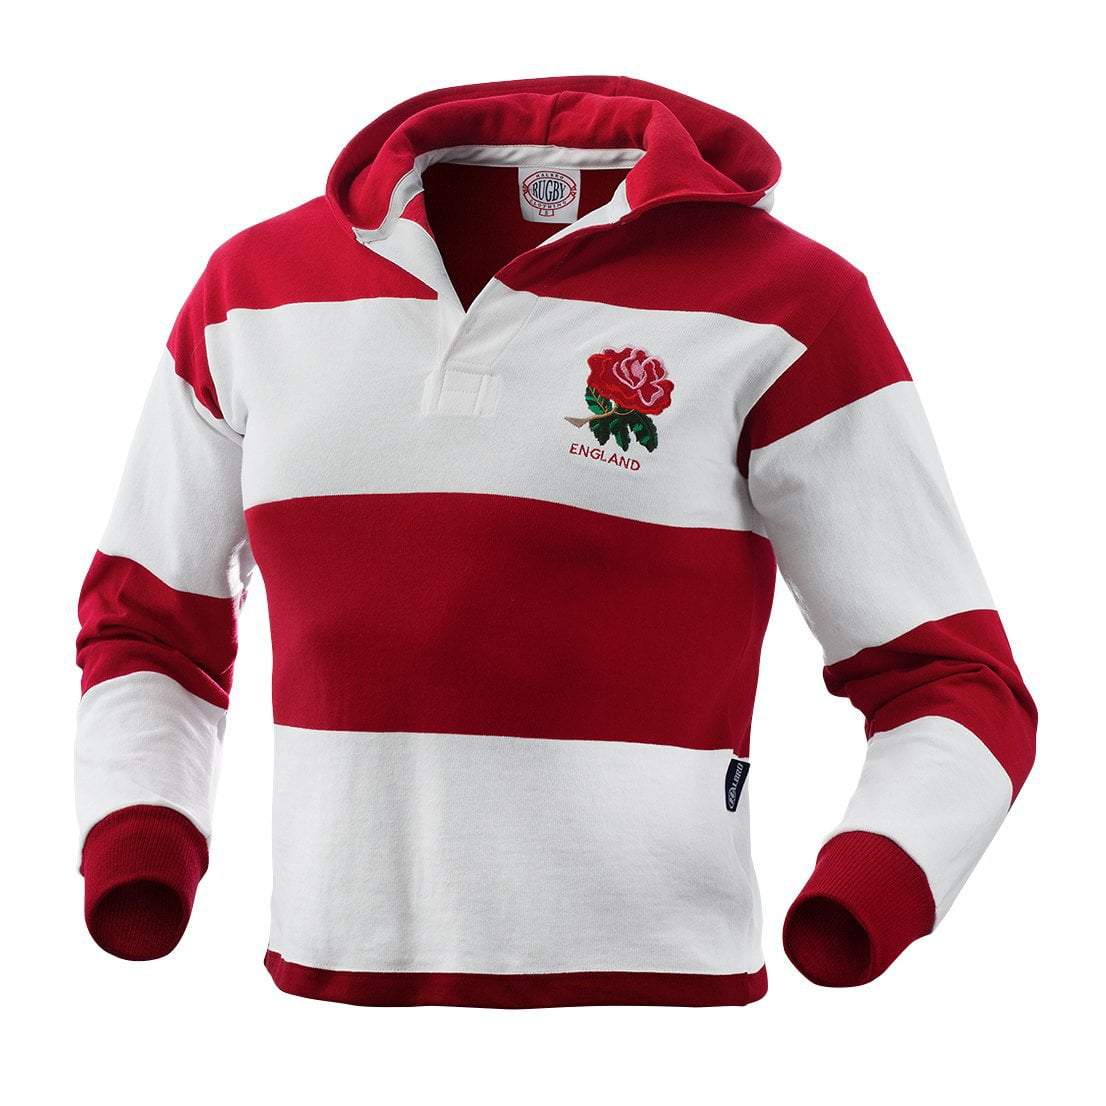 England Hooded Rugby Jersey